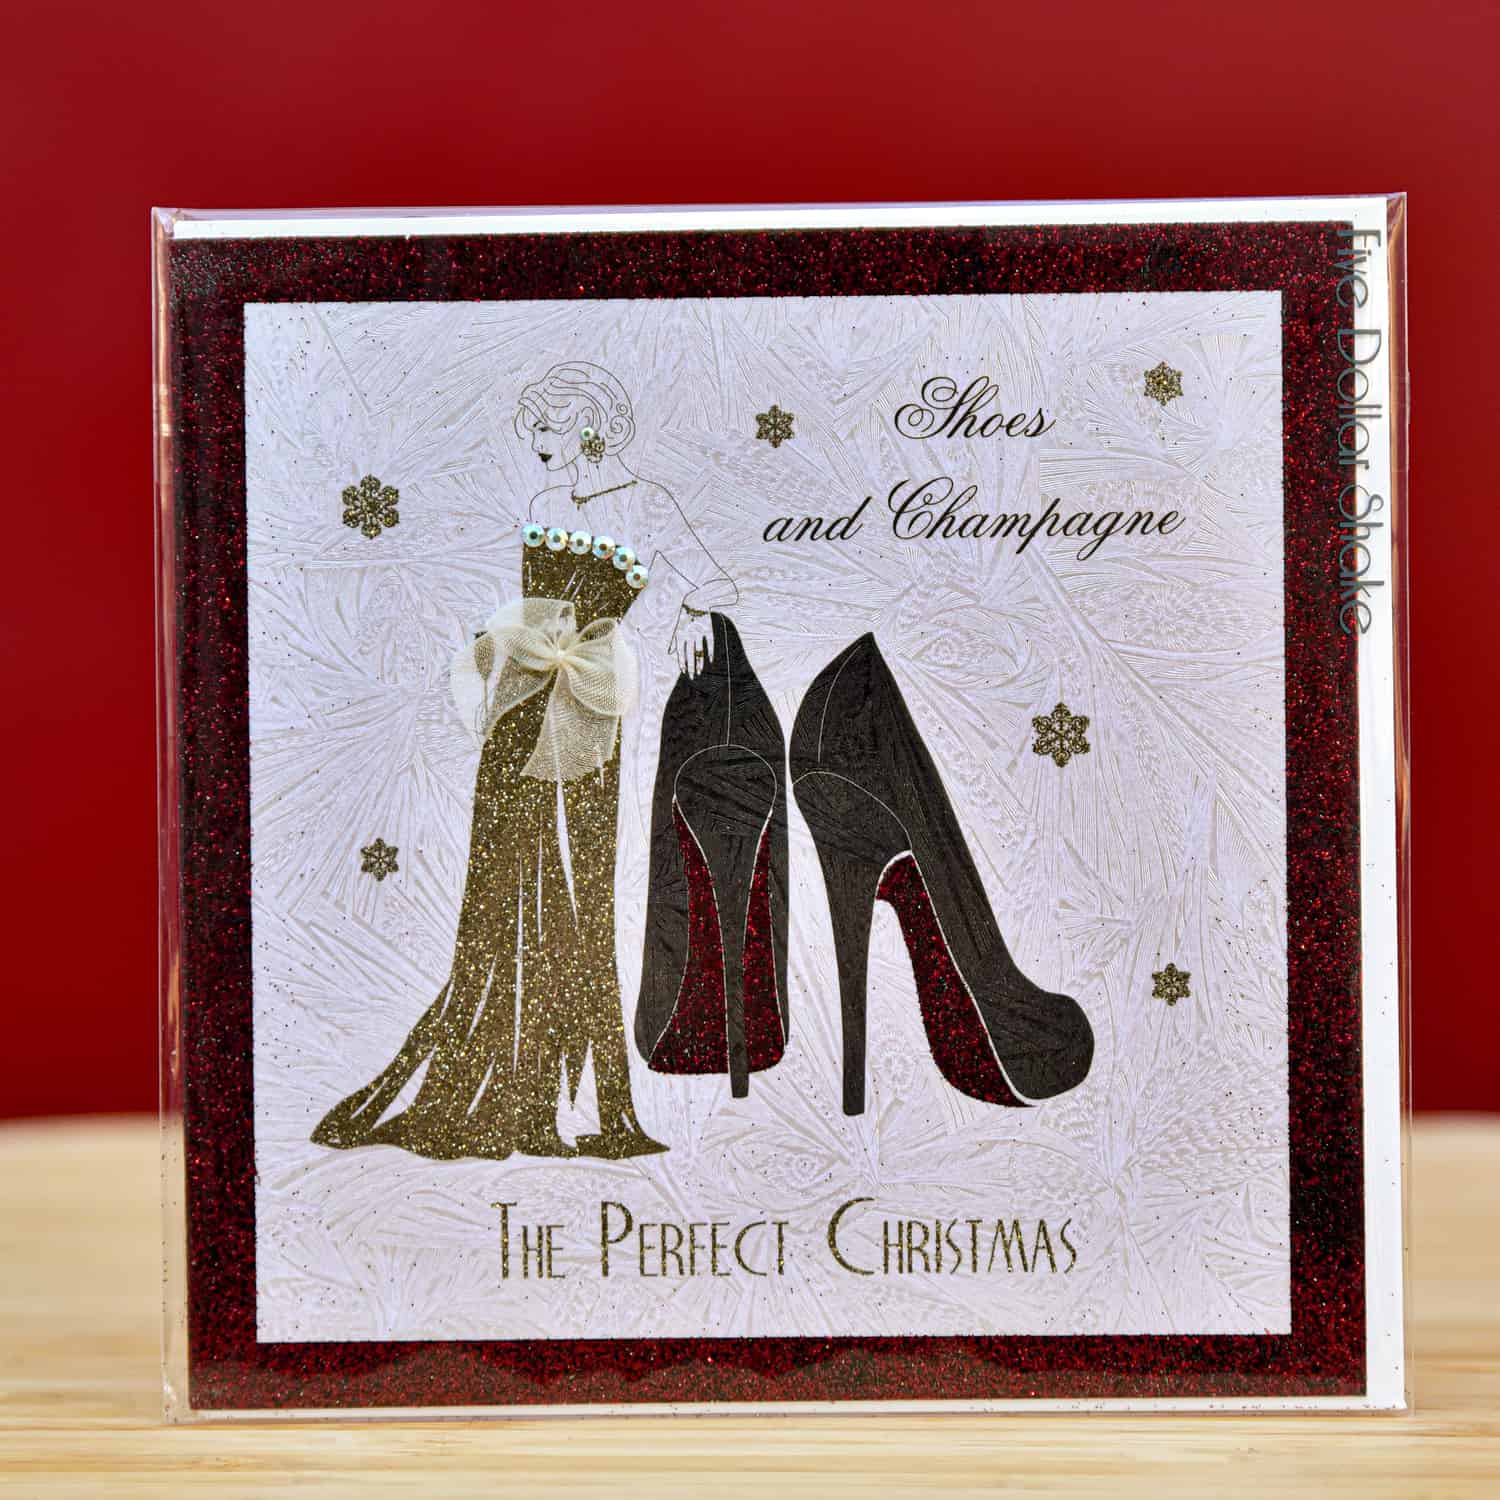 General Five Dollar Shake Christmas Card - Shoes and Champagne - Gifts  online UK UK Delivery Yorkshire